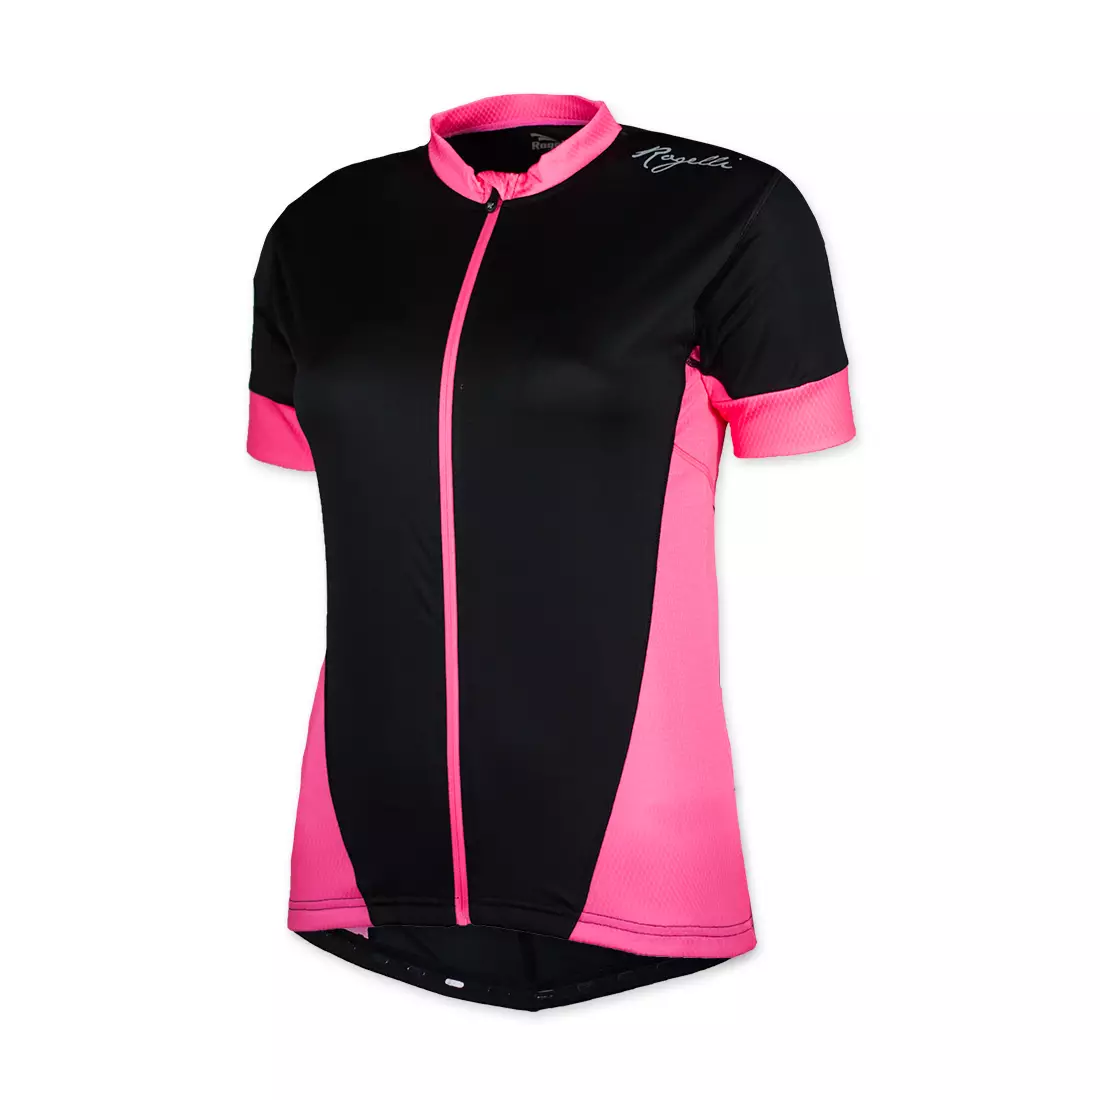 ROGELLI BIKE 010-025 CAPRICE - women's cycling jersey, black and pink